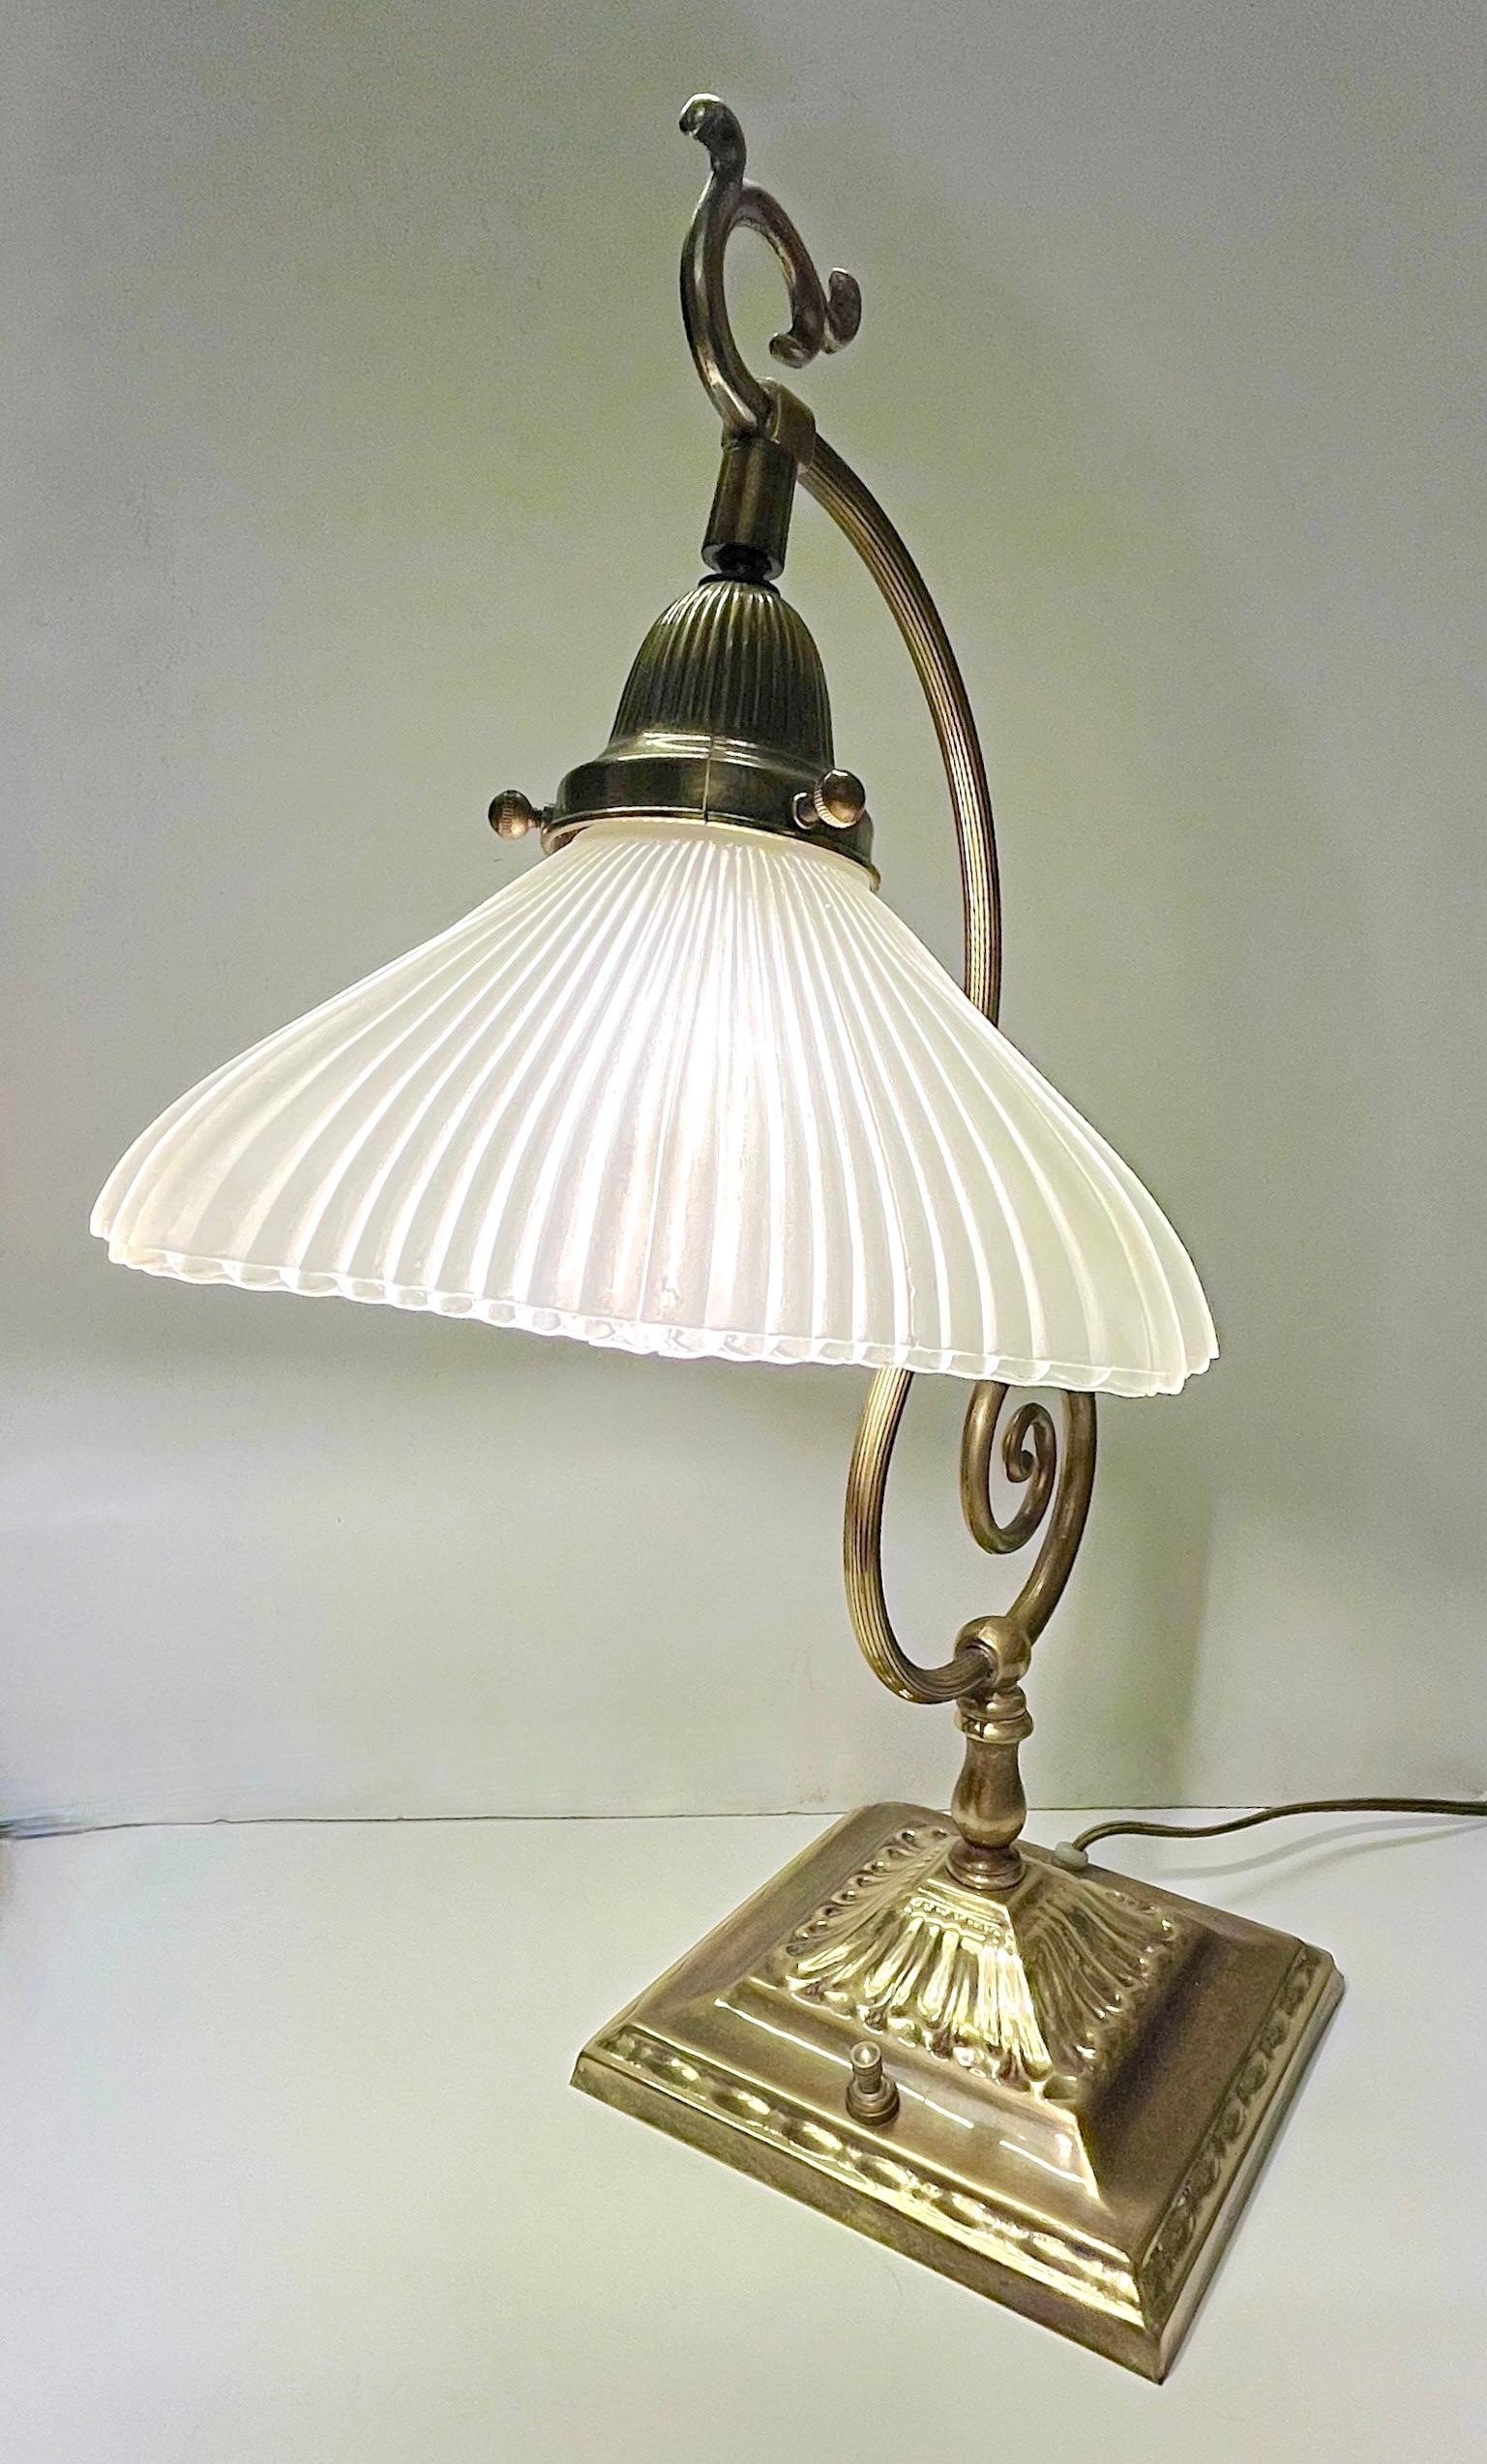 Frosted 1950s American Art Deco Style Brass Table/Desk Lamp with Satin White Glass Shade For Sale